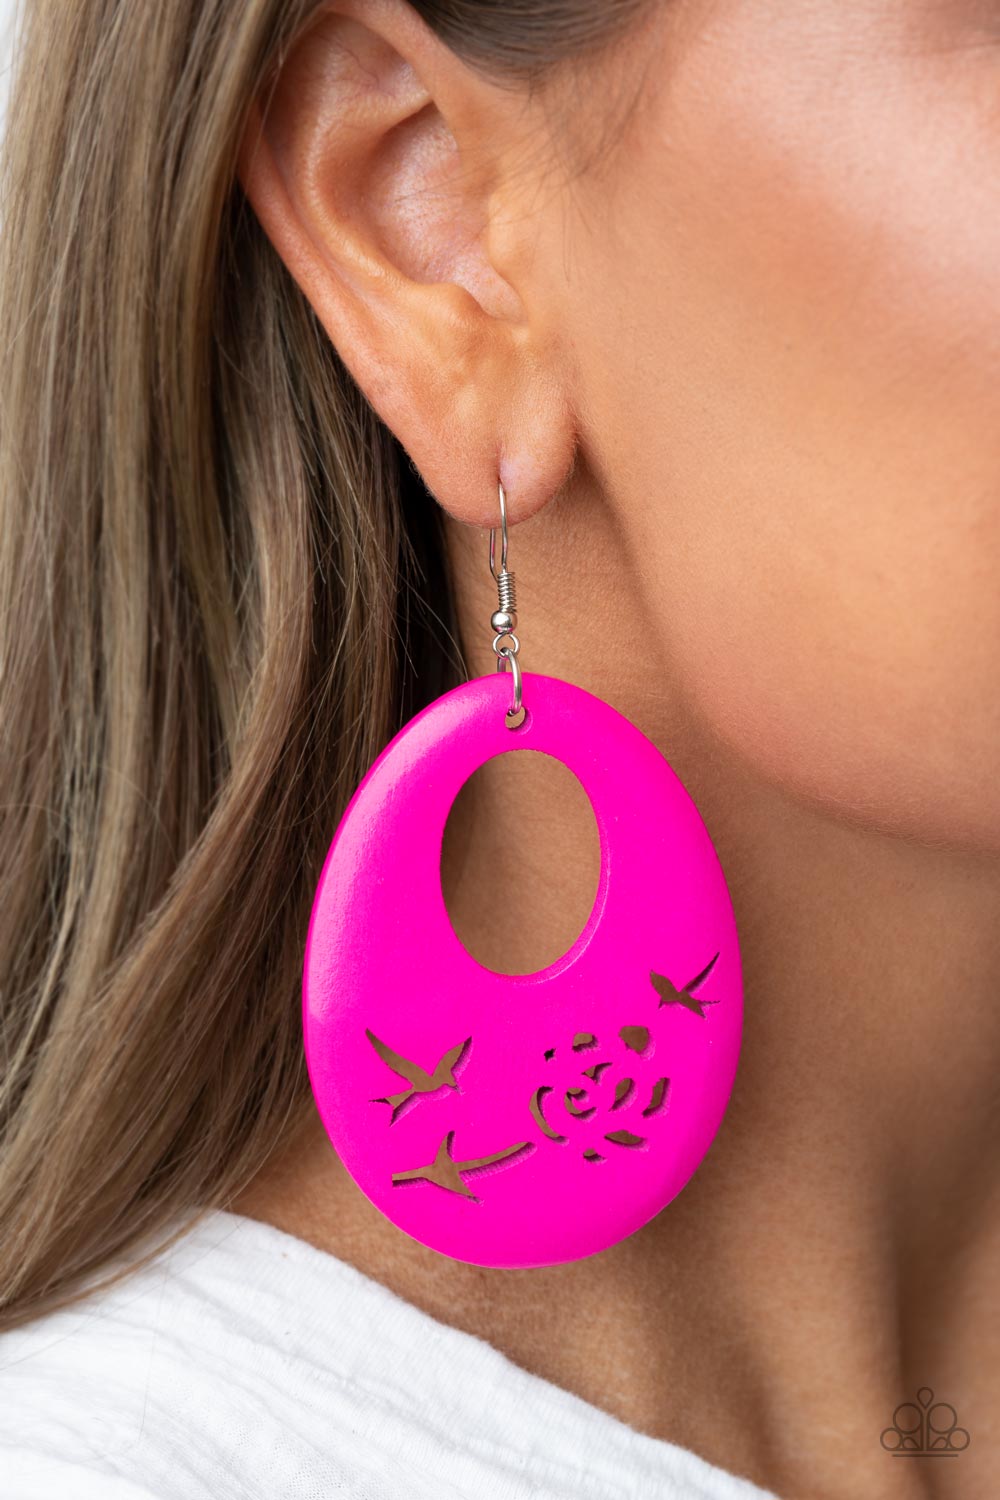 Home TWEET Home Pink Earring - Paparazzi Accessories  The bottom of a Fuchsia Fedora wooden teardrop frame features bird and floral cutouts, creating a whimsical centerpiece. Earring attaches to a standard fishhook fitting.  Sold as one pair of earrings.